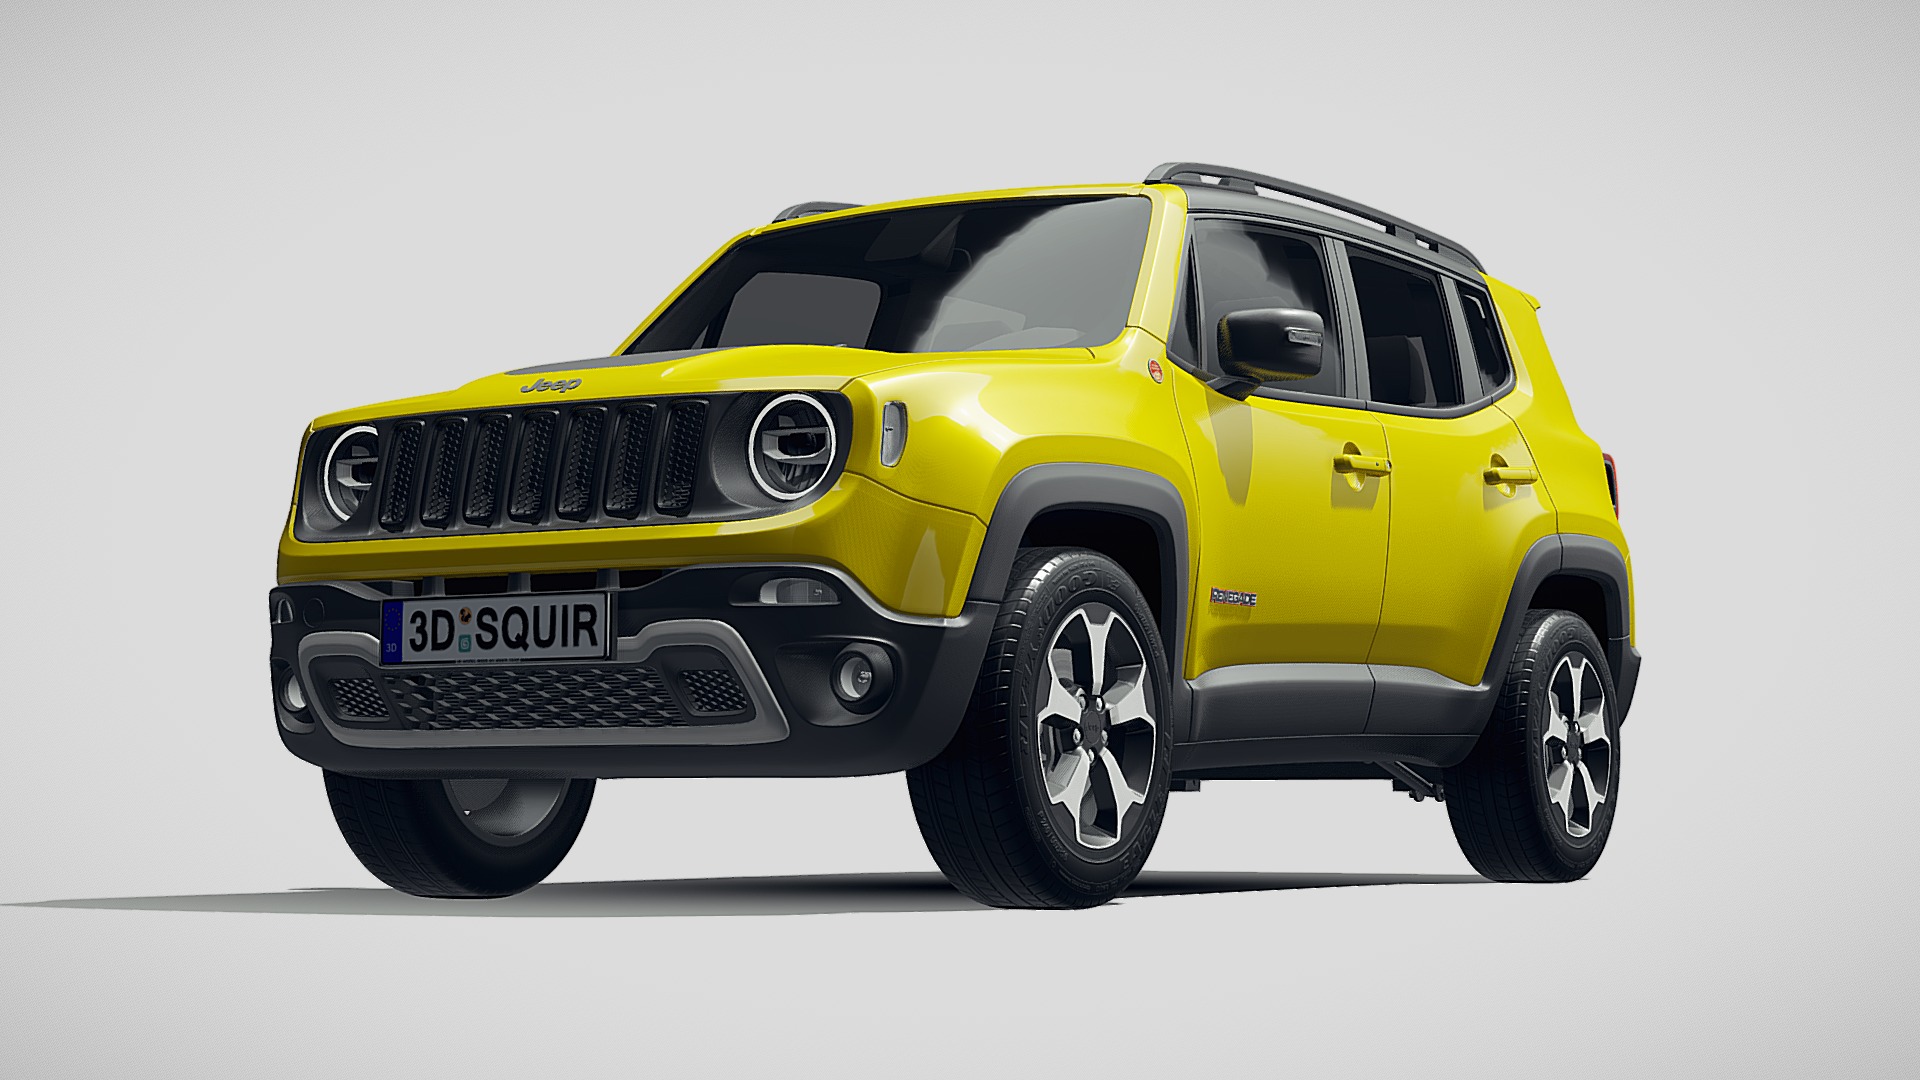 3D model Jeep Renegade 2019 - This is a 3D model of the Jeep Renegade 2019. The 3D model is about a yellow car with black wheels.